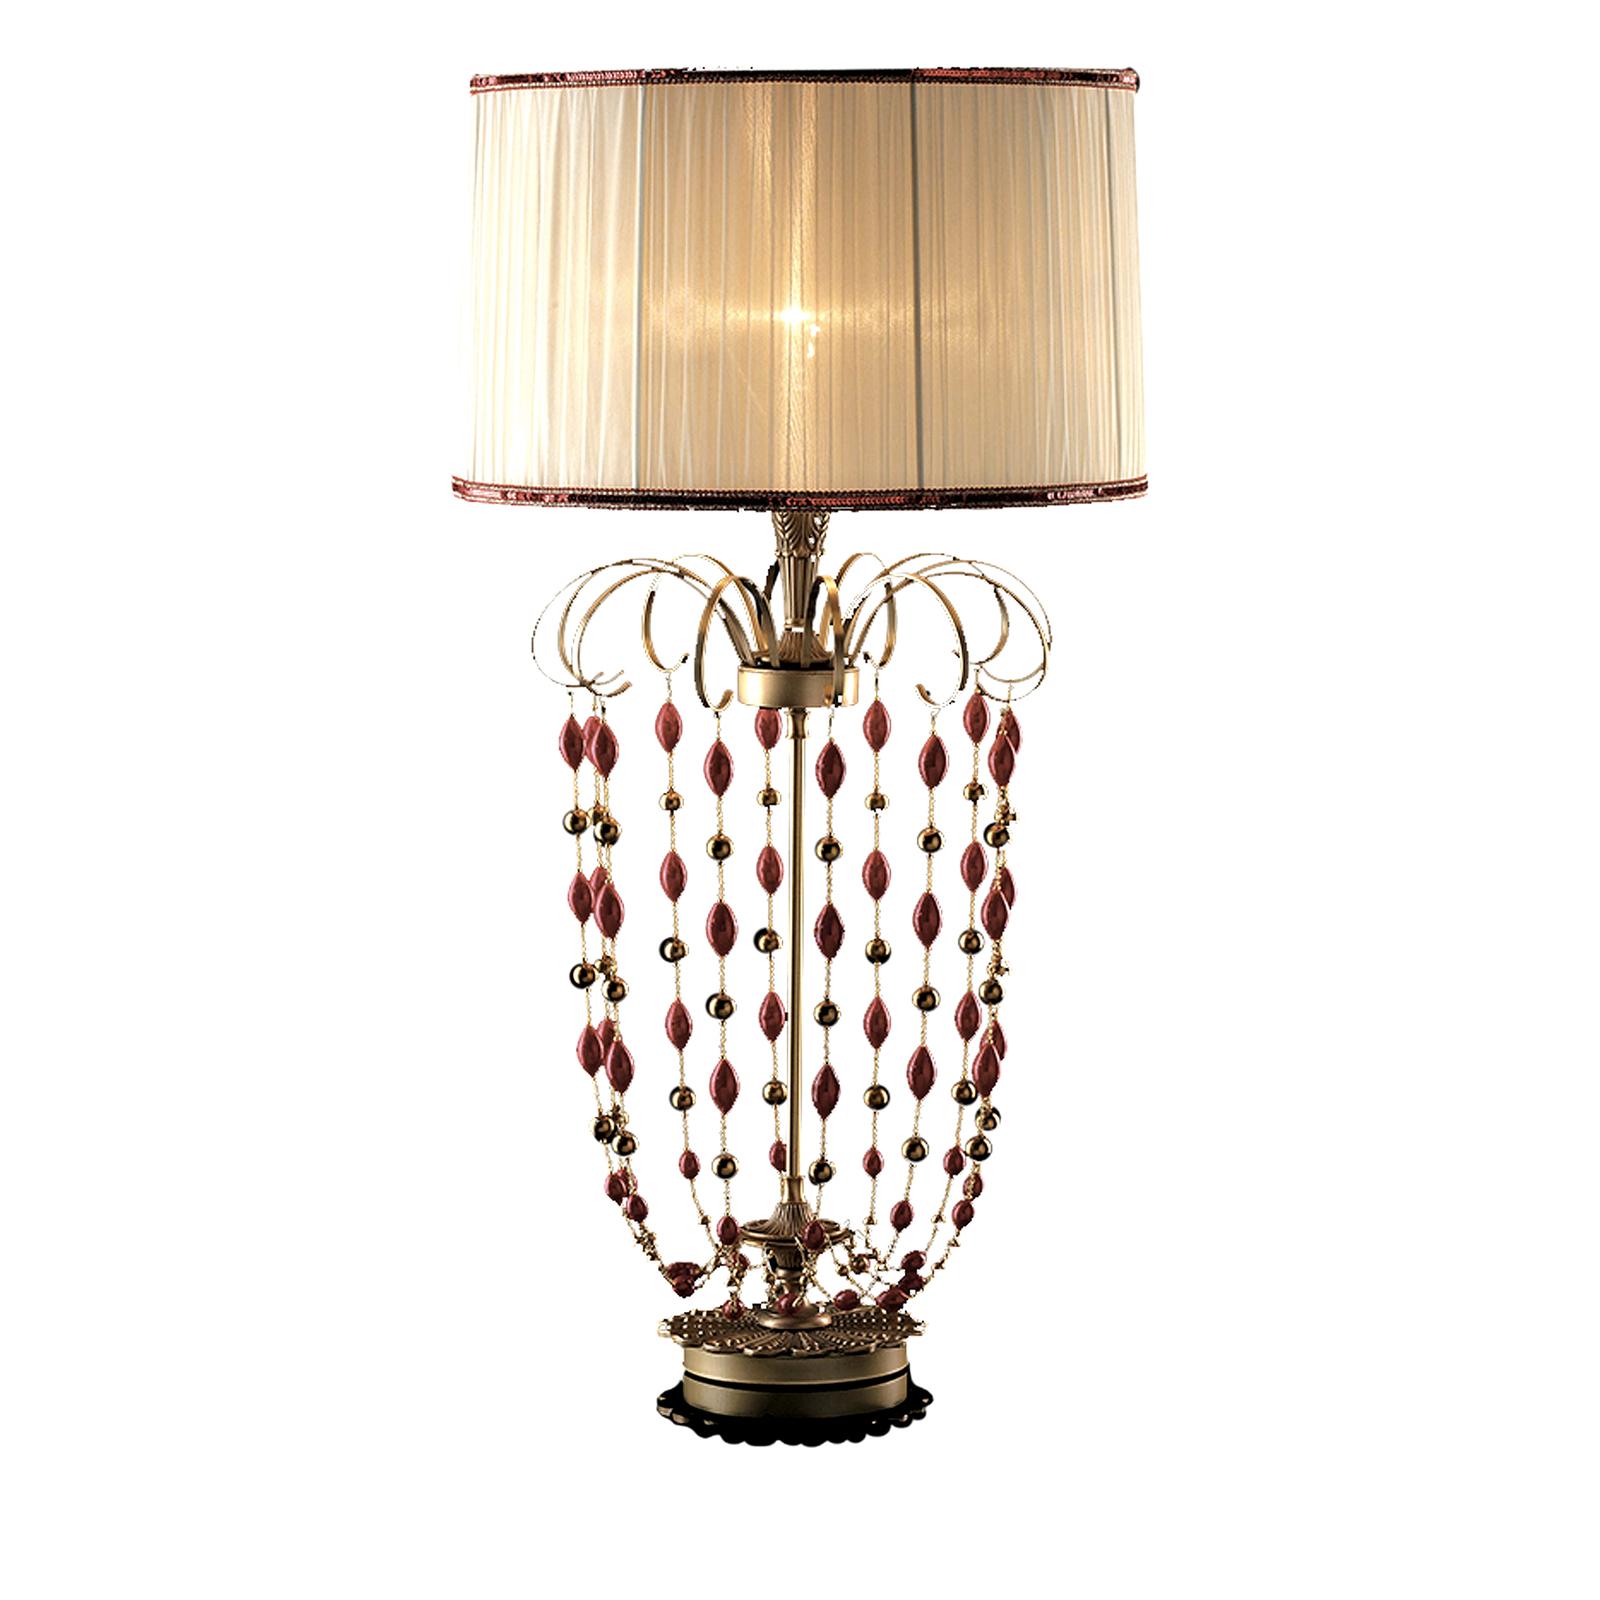 This charming table lamp will add a unique accent to an entryway, living room, or bedroom. The piece's metal structure is made up of a round base supporting a vertical rod adorned at the top with a series of spiral motifs from which delicate stings